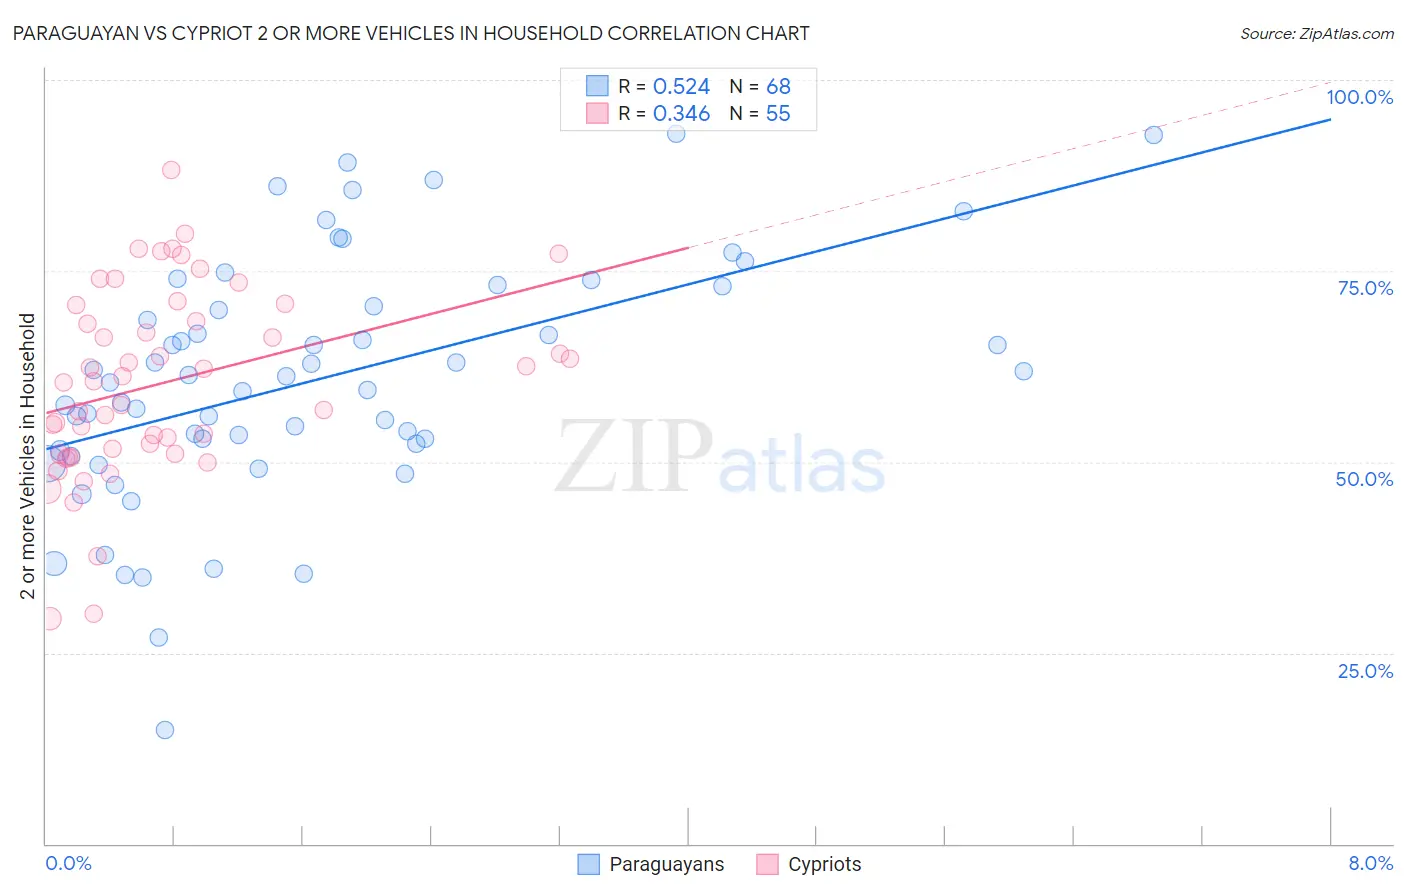 Paraguayan vs Cypriot 2 or more Vehicles in Household